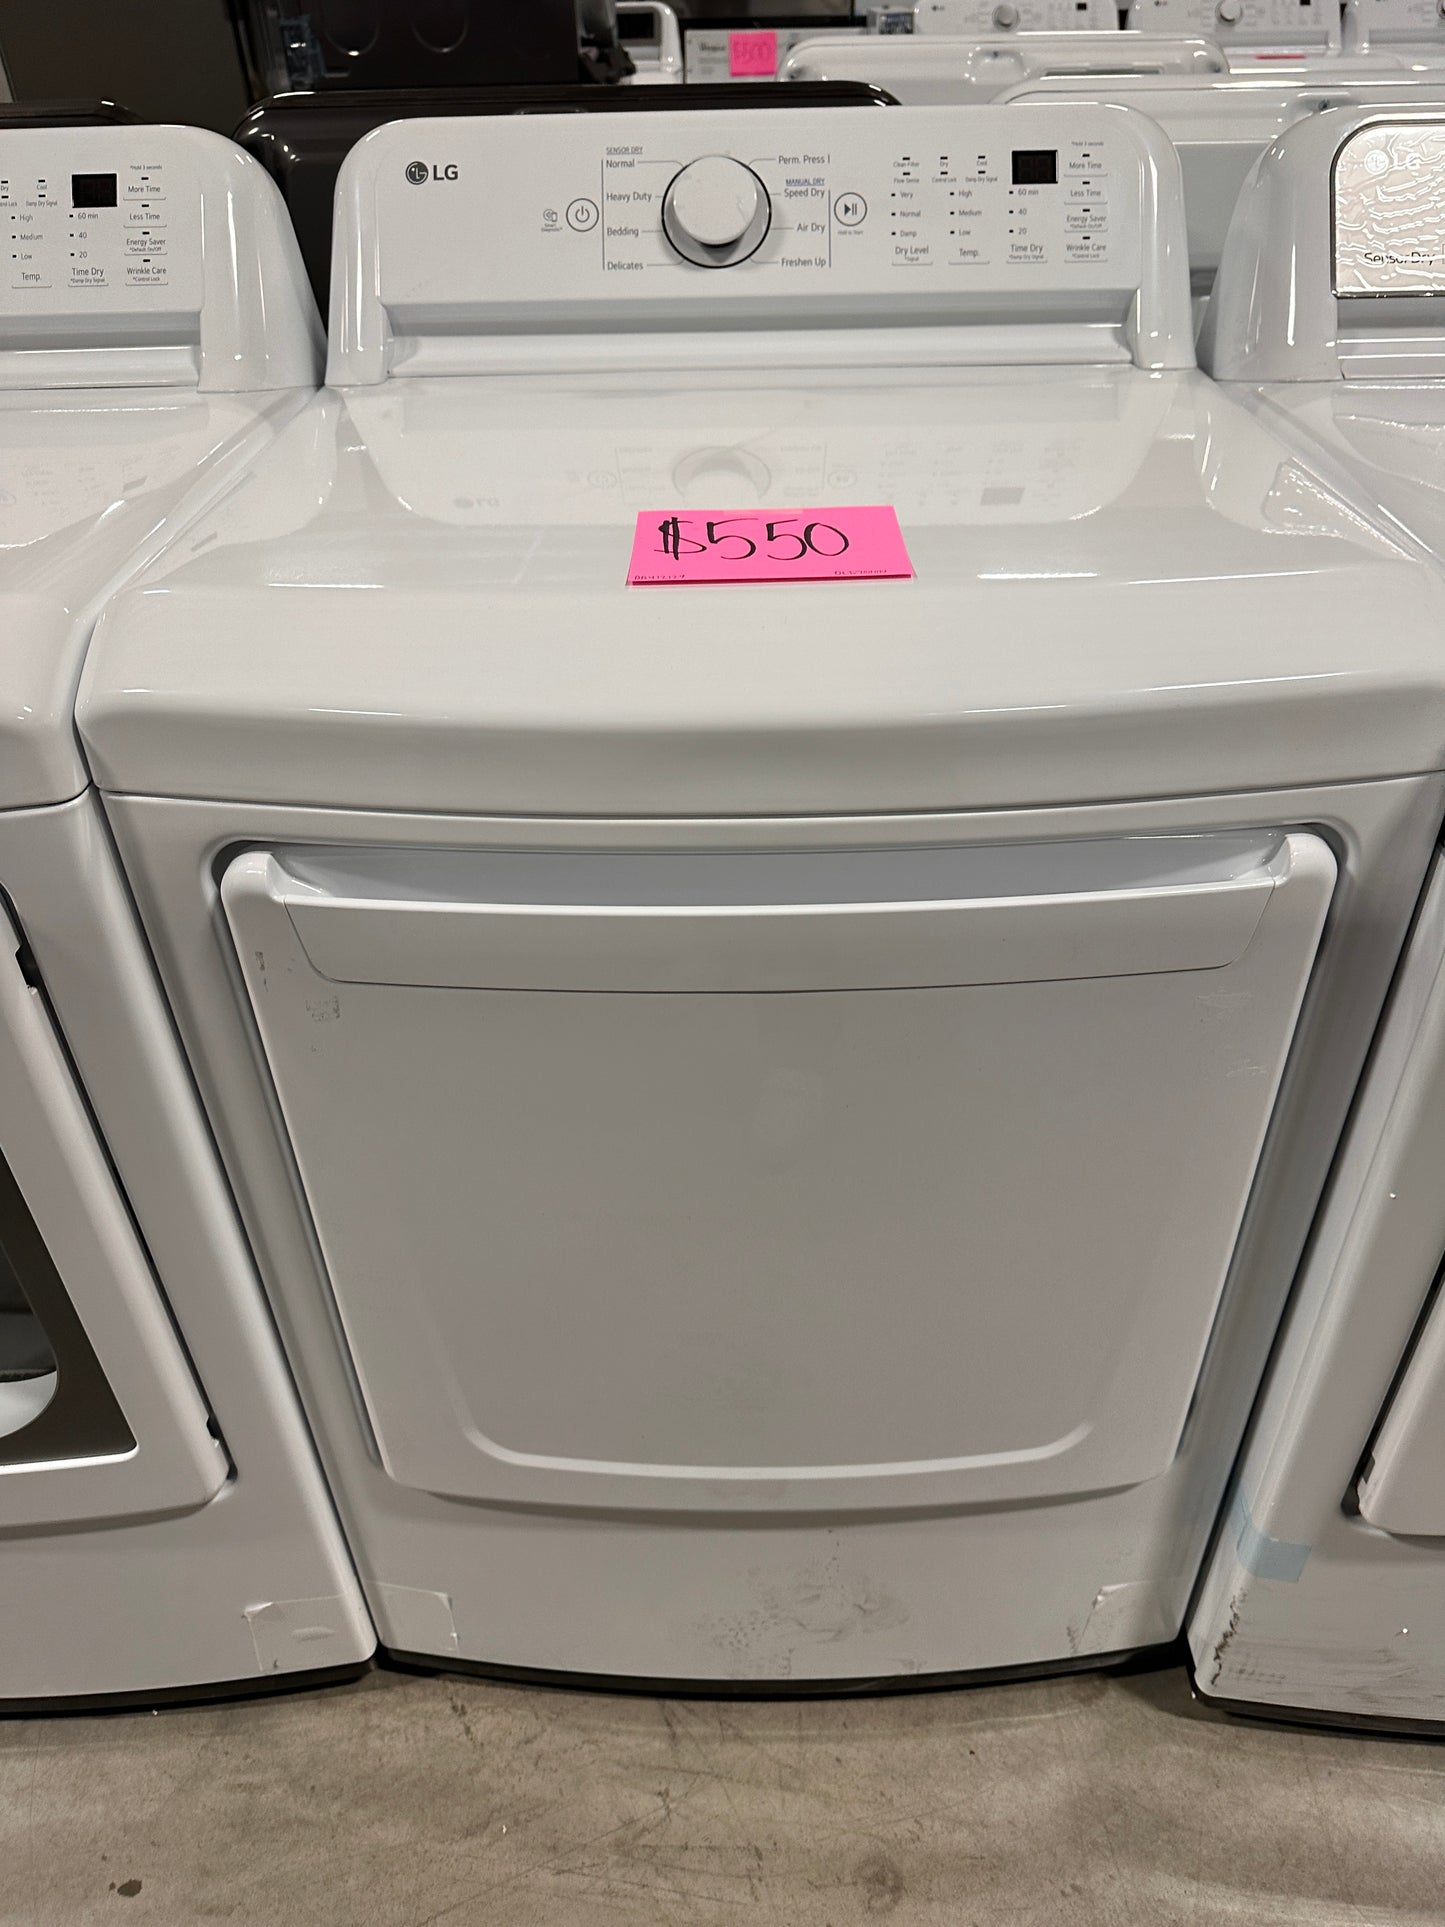 GORGEOUS NEW ELECTRIC DRYER with SENSOR DRY - DRY12129